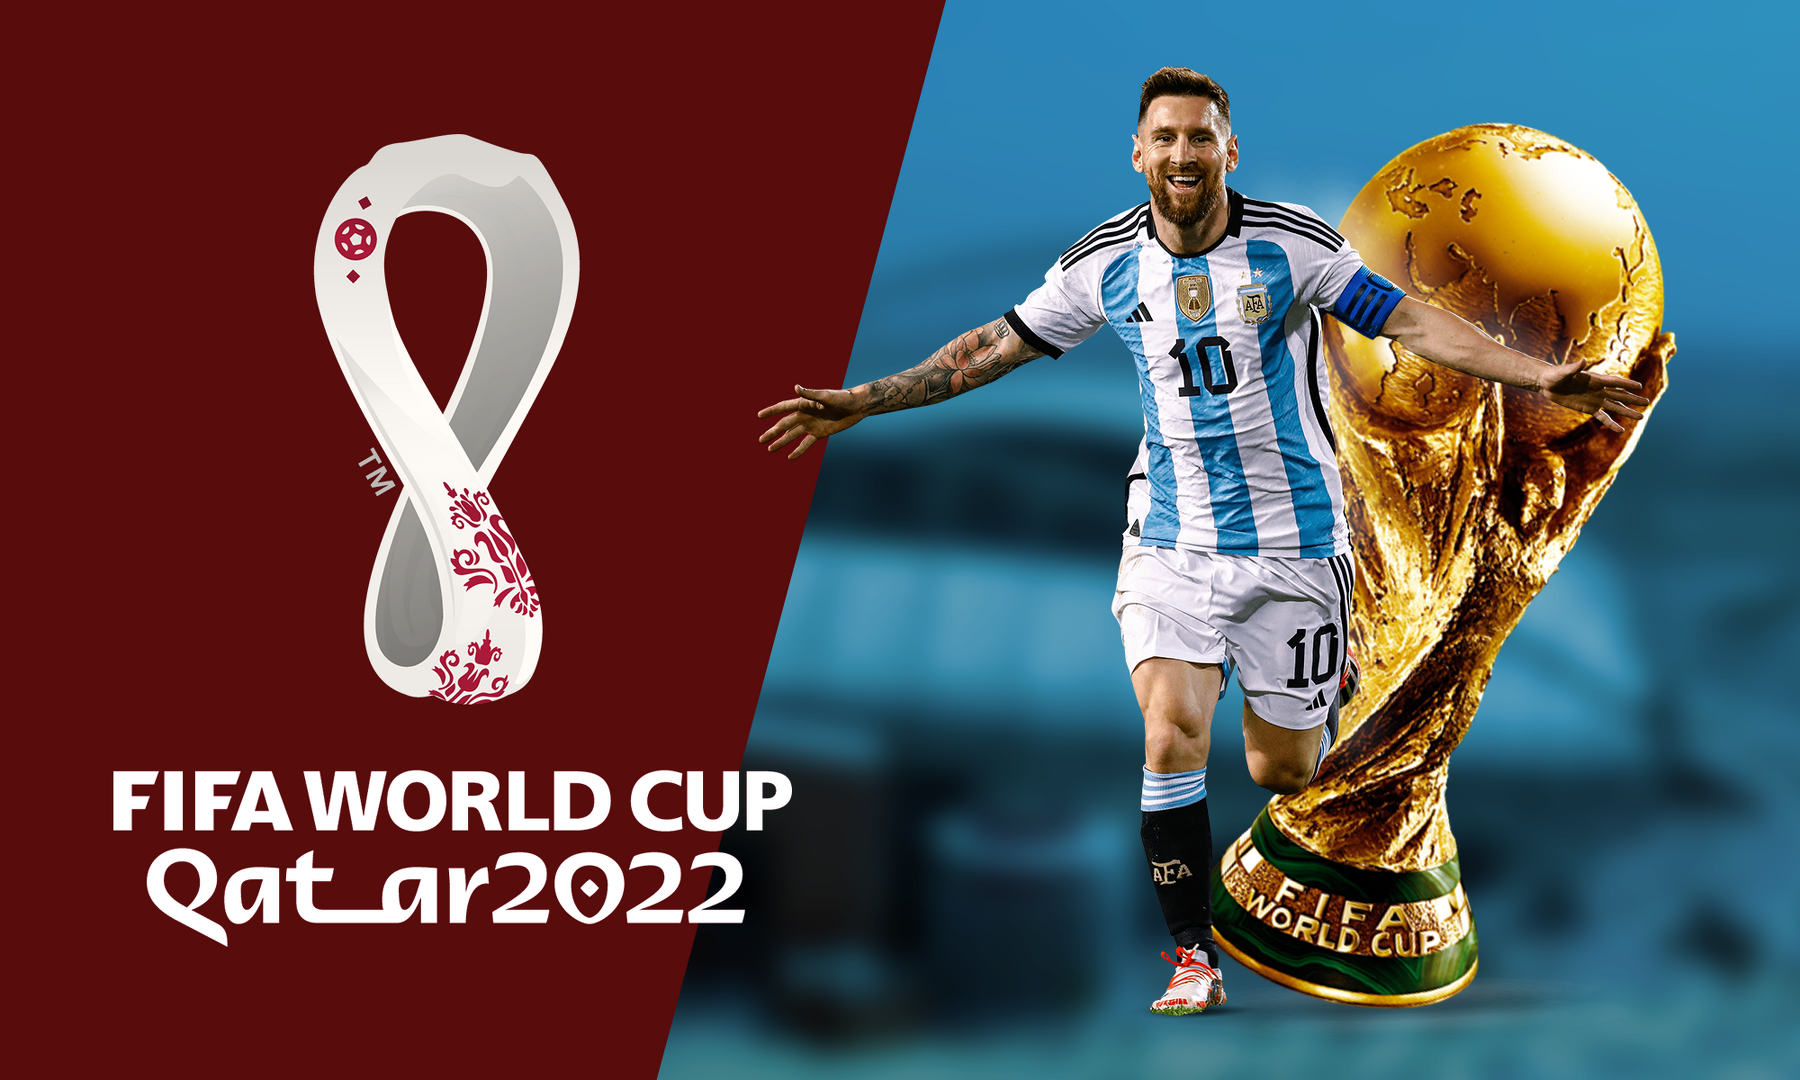 Records That Lionel Messi Can Break At The 2022 Fifa World Cup